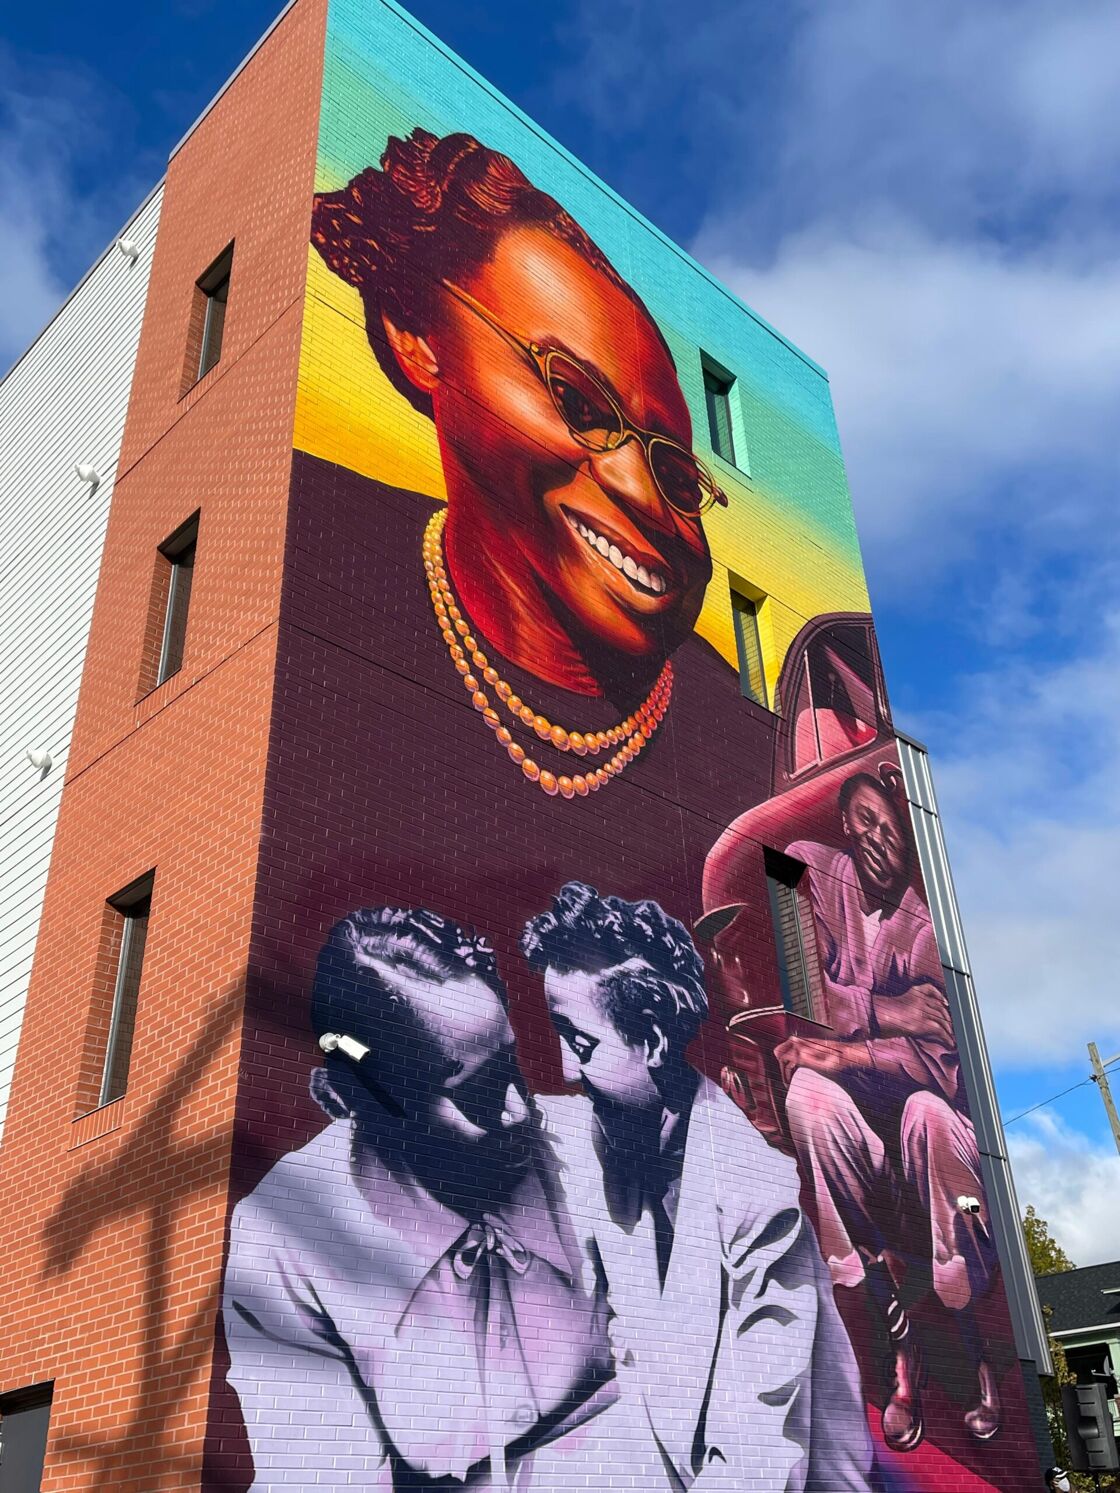 The Ruth Ellis Center's new facility in Detroit's Piety Hill neighborhood unveiled a mural designed by local artist Ijania Cortez.